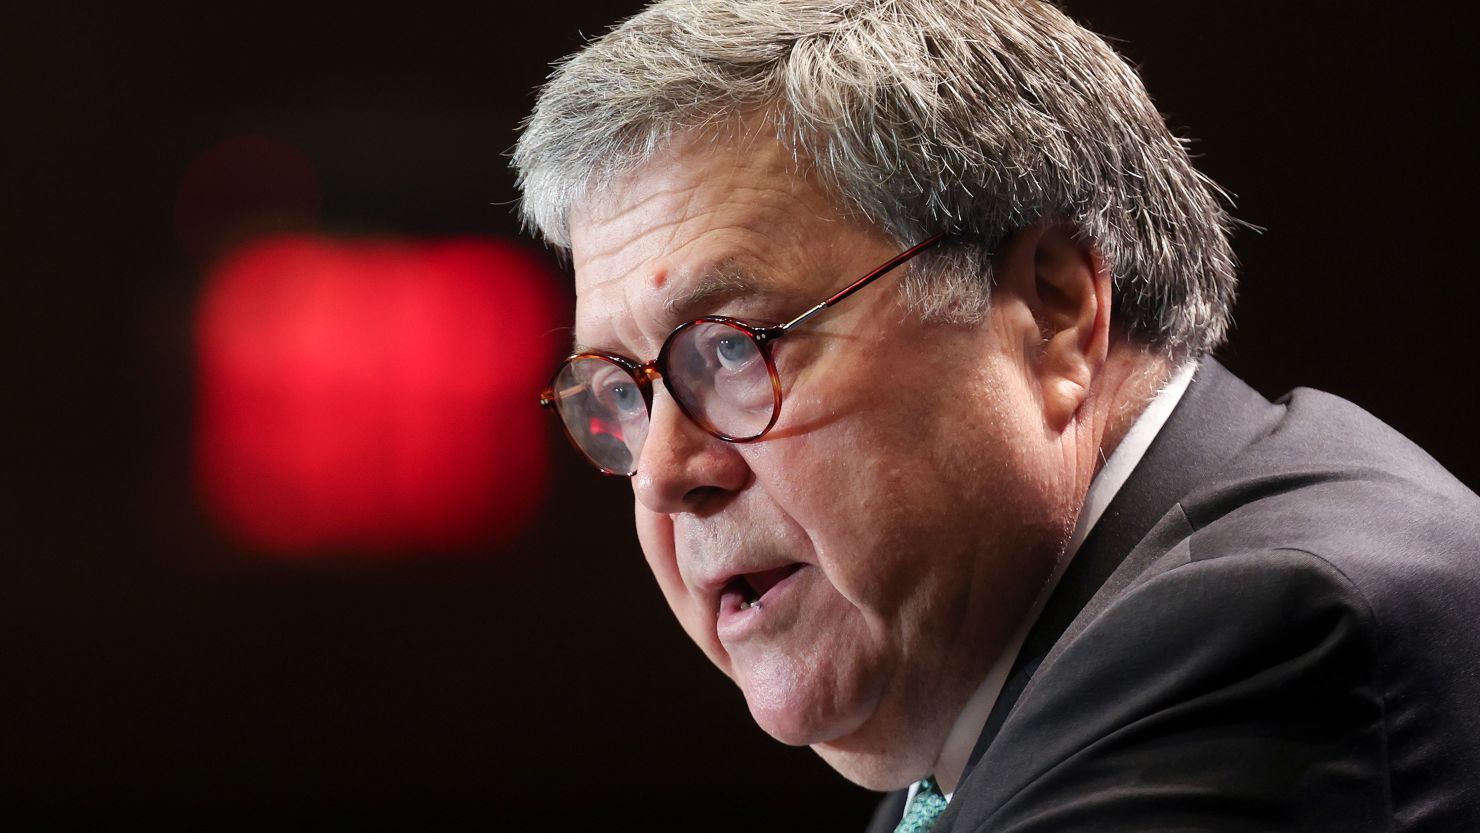 Former U.S. Attorney General William Barr speaks at a meeting of the Federalist Society on September 20, 2022 in Washington, DC.